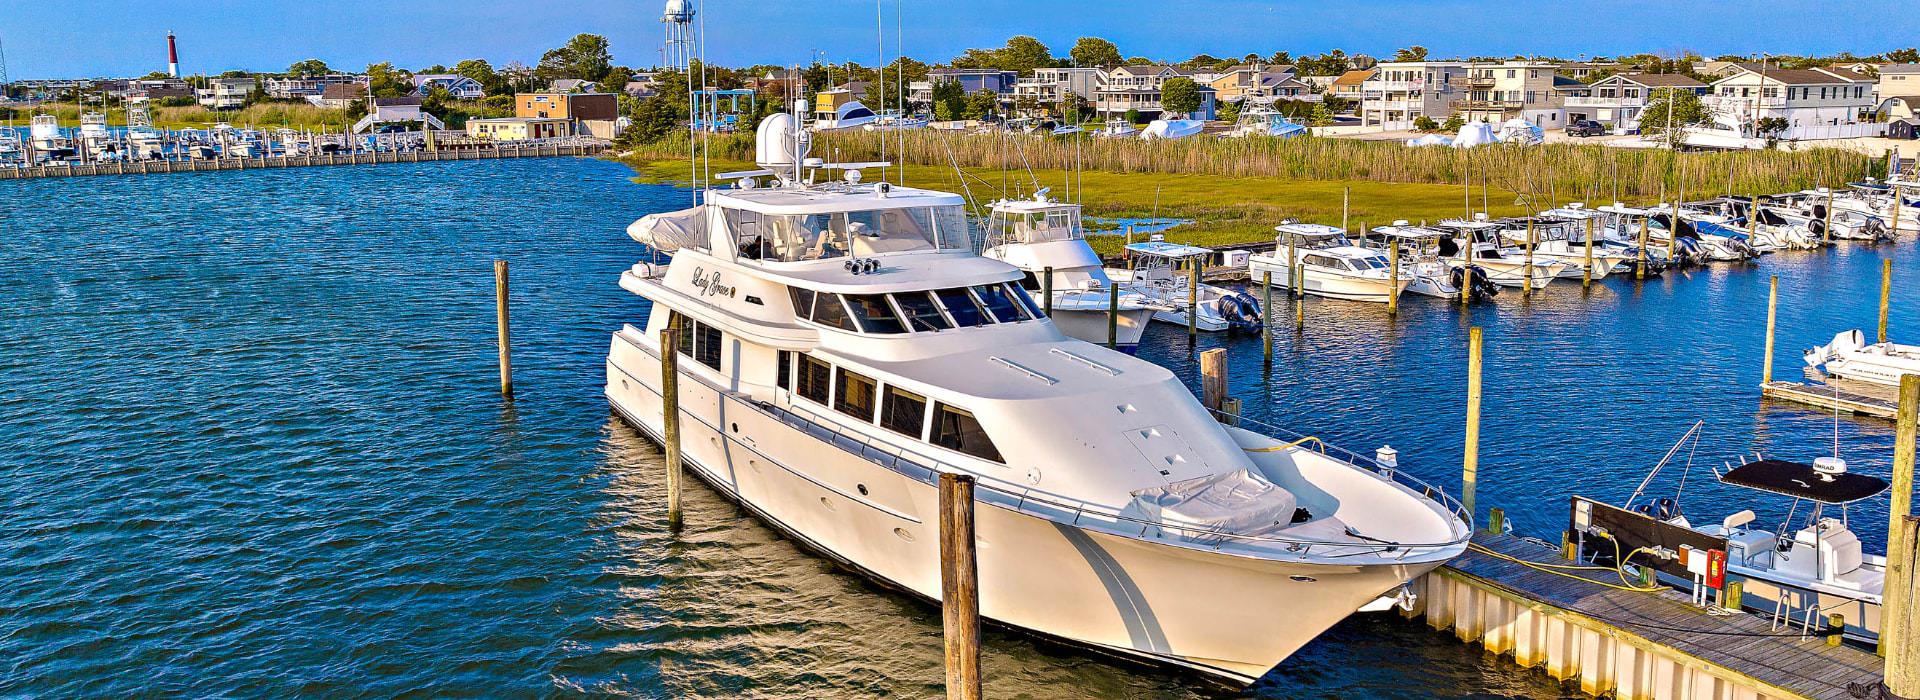 White yacht named Lady Grace docked in a marina